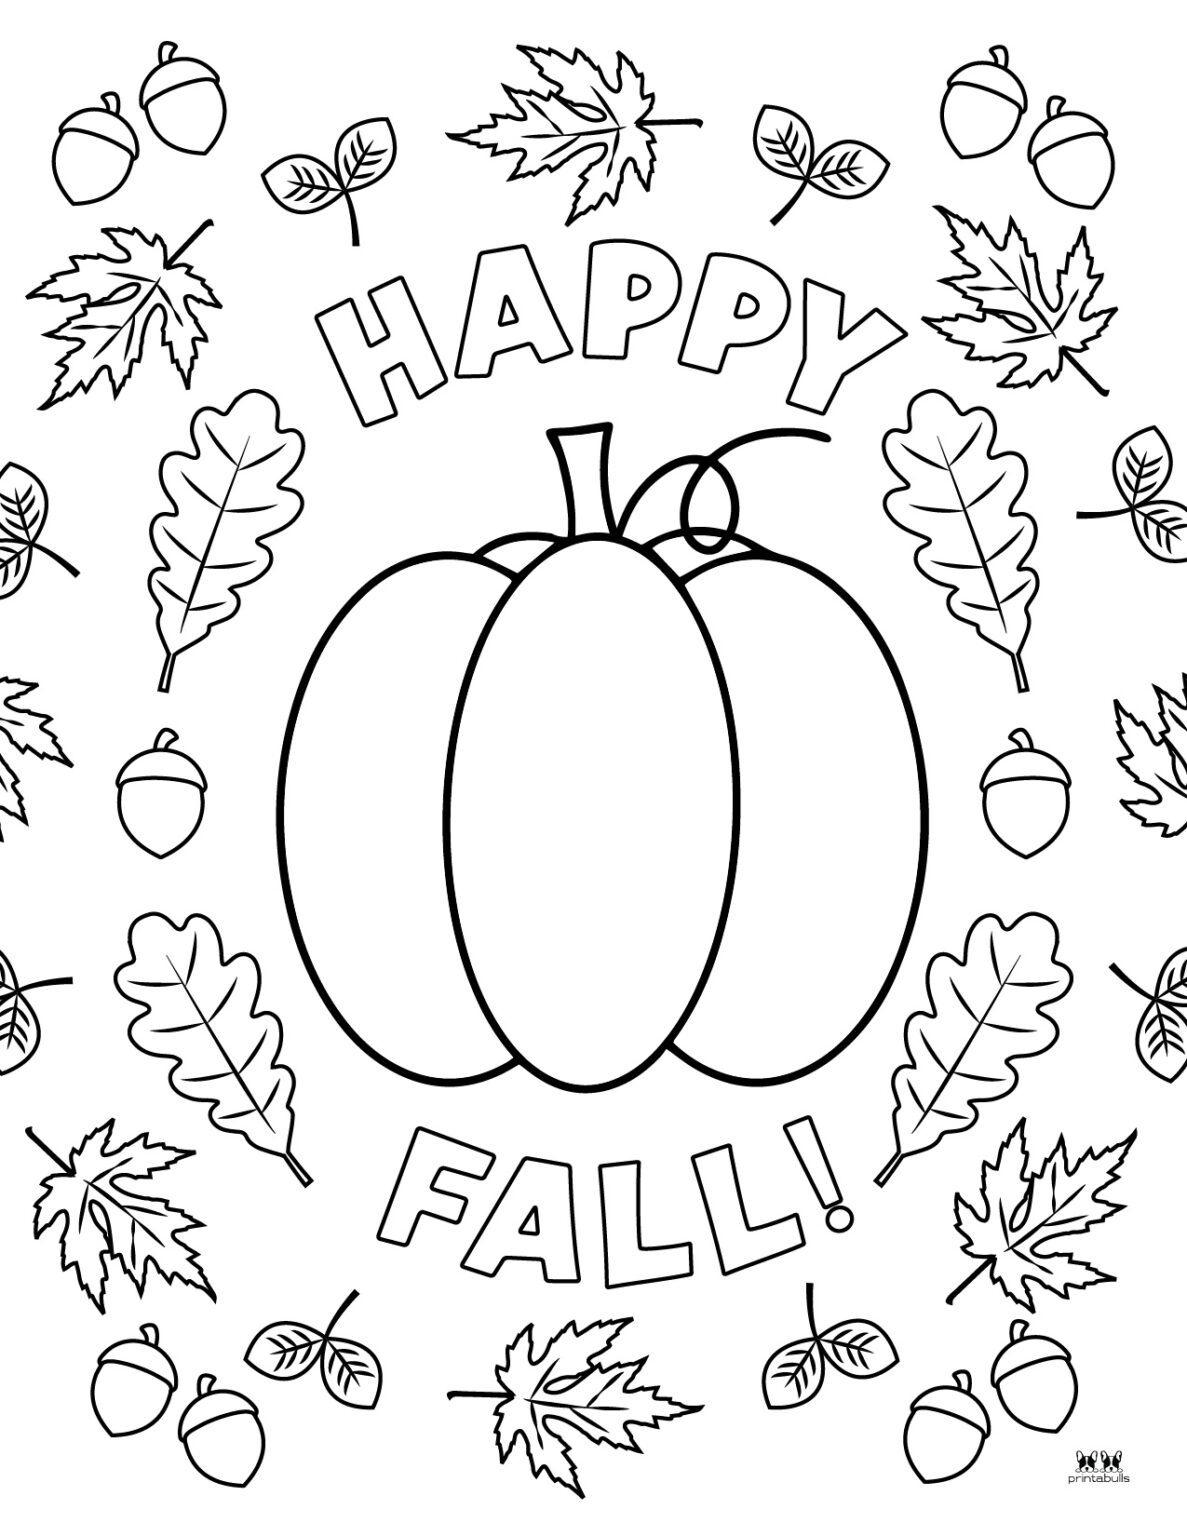 Leaf Outlines, Templates & Coloring Pages - 55 FREE Pages | Printabulls